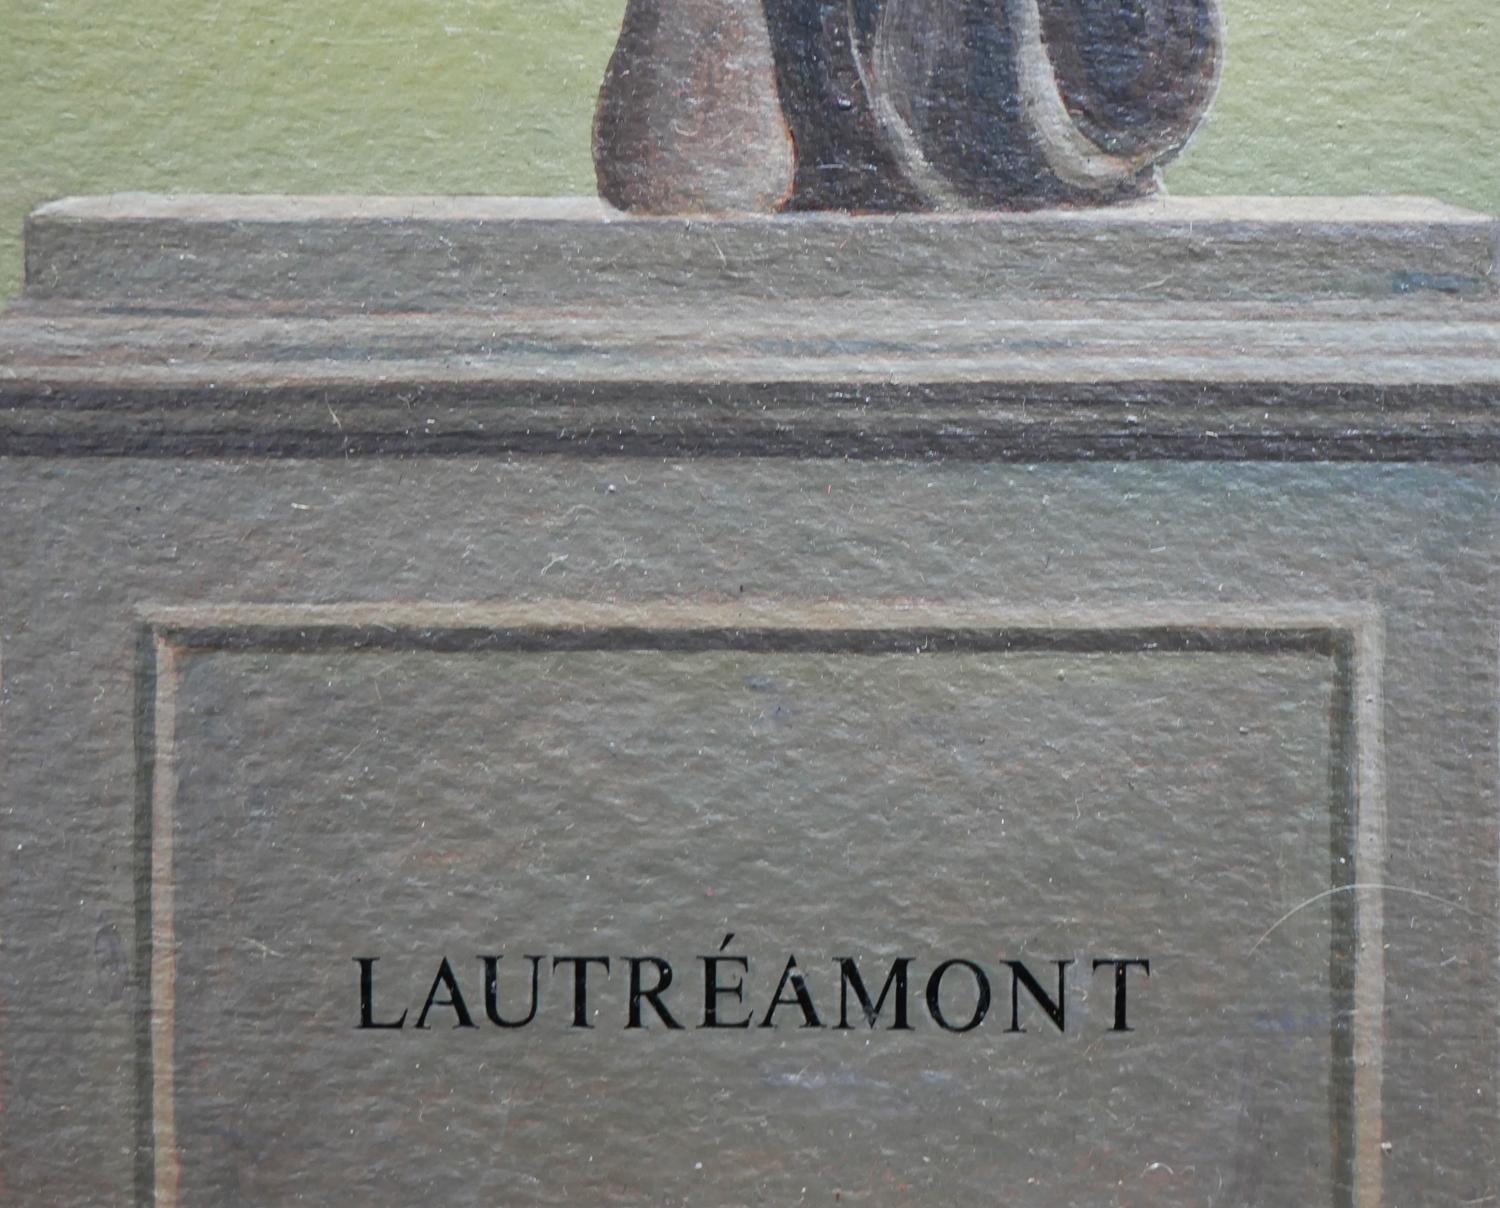 Abstract Surrealist Painting of Lautréamont's Tomb with a Winged Grecian Statue  7